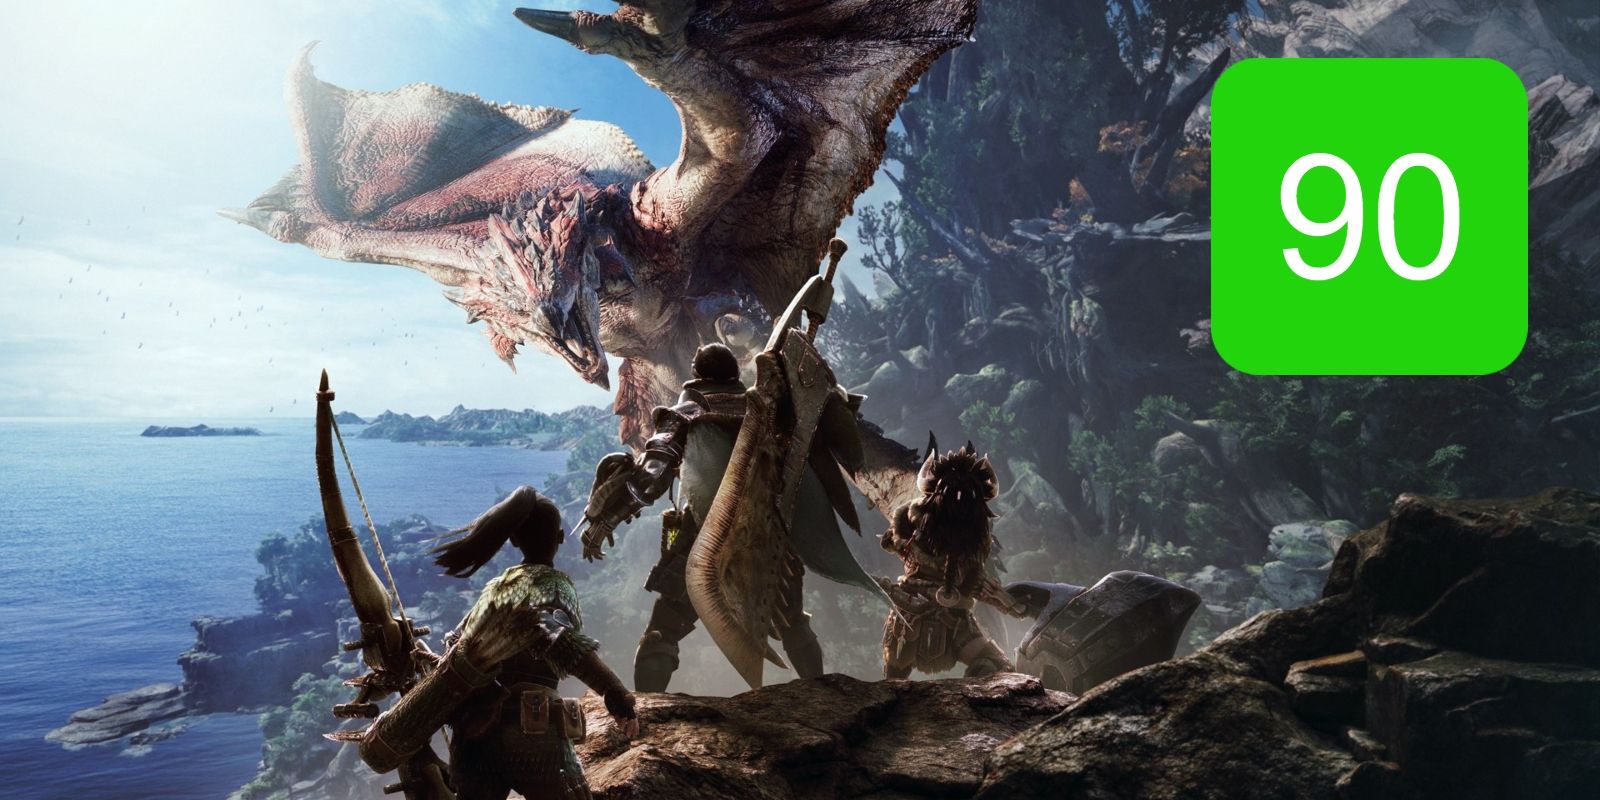 The PS4 and Xbox One Metascore for Monster Hunter World